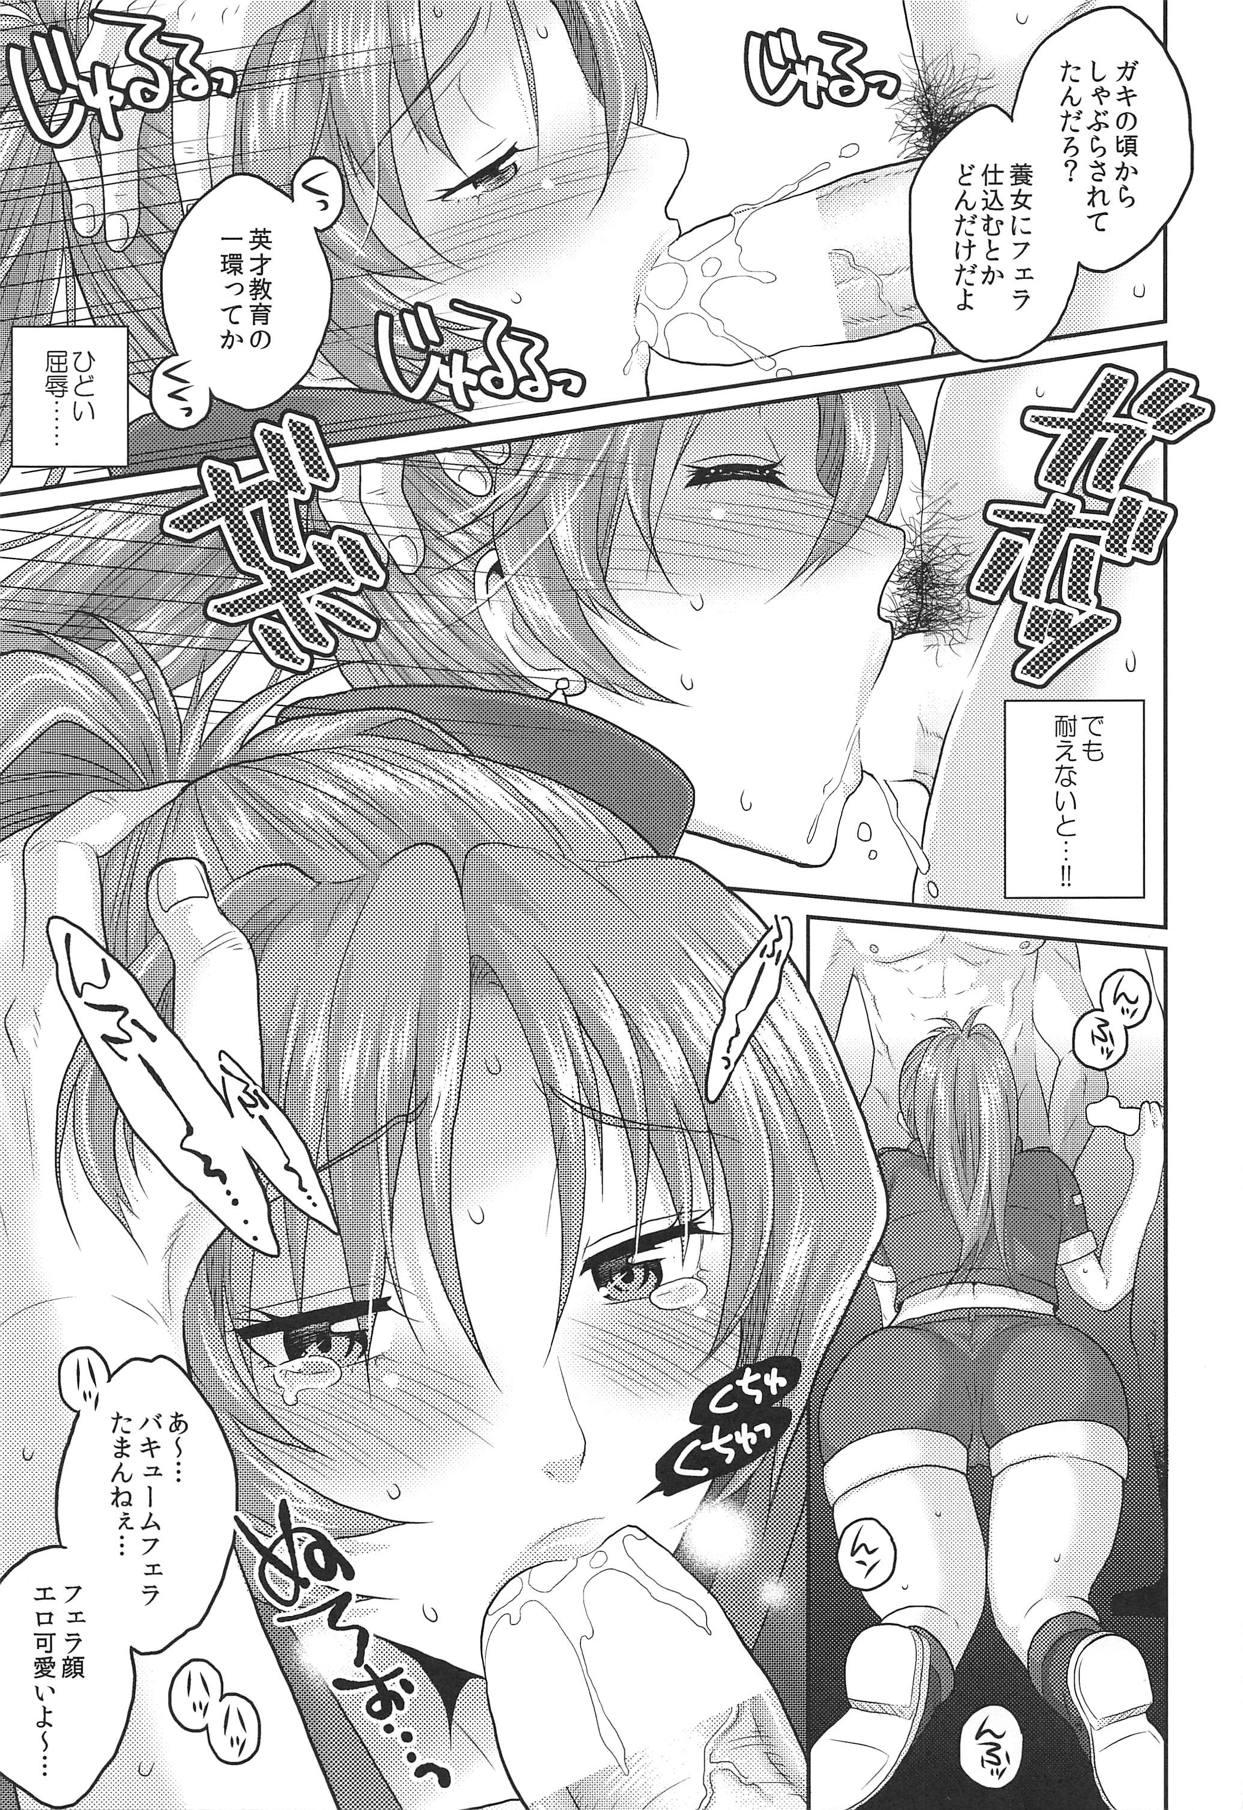 Assfingering nymphomania 7.1 Leona Rinkan 2 - King of fighters Lolicon - Page 6